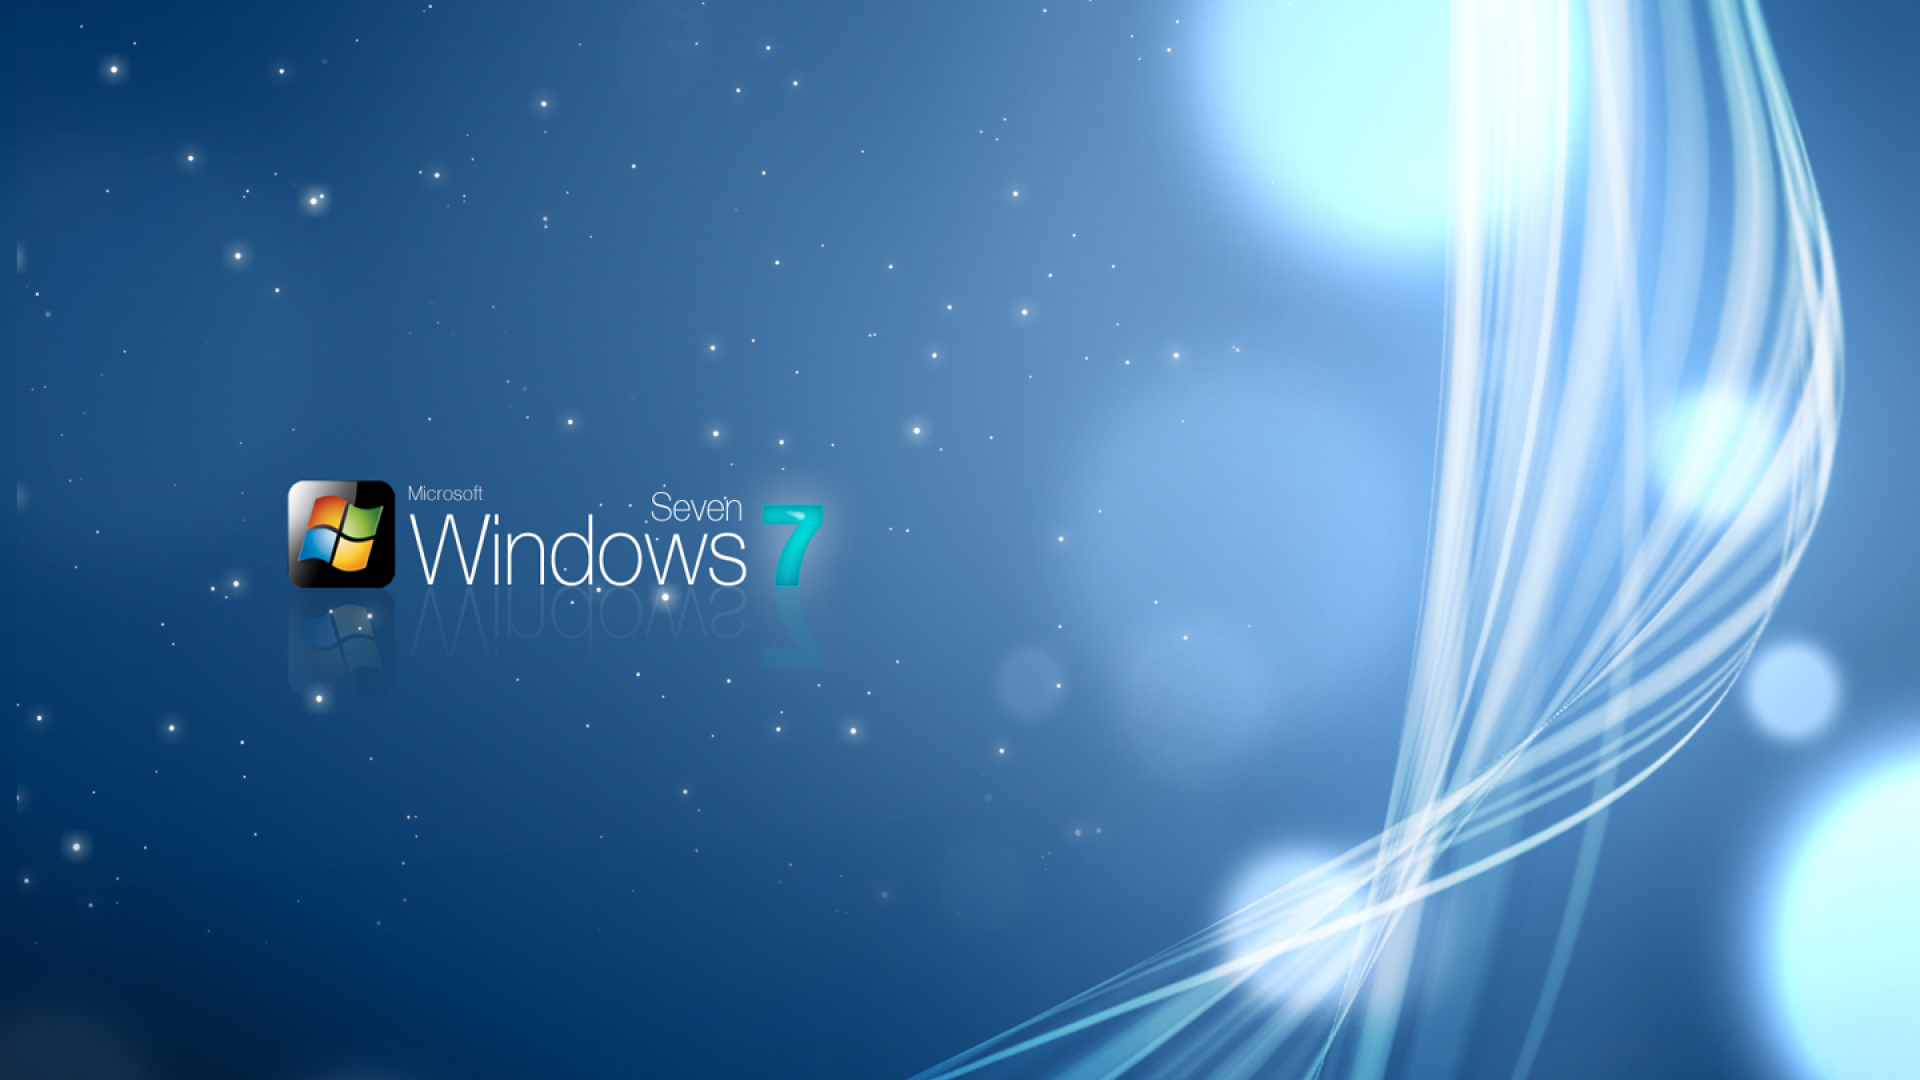 Windows 7 Sparkly Wallpaper   HD Wallpapers